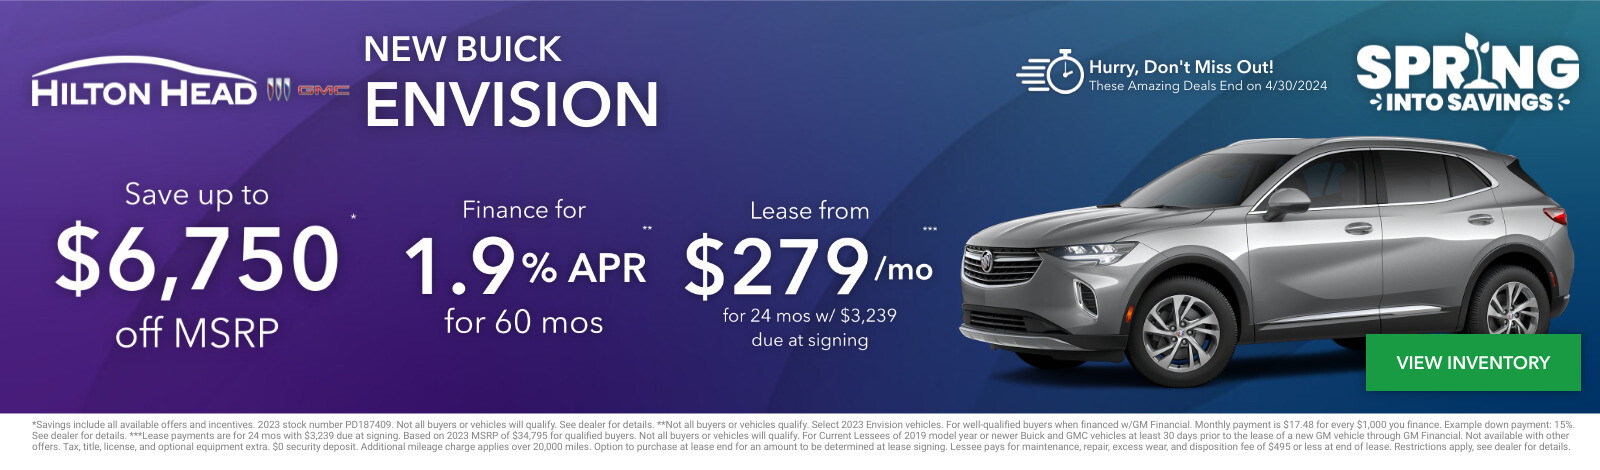 New Buick Envision Current Deals and Offers in Savannah, GA